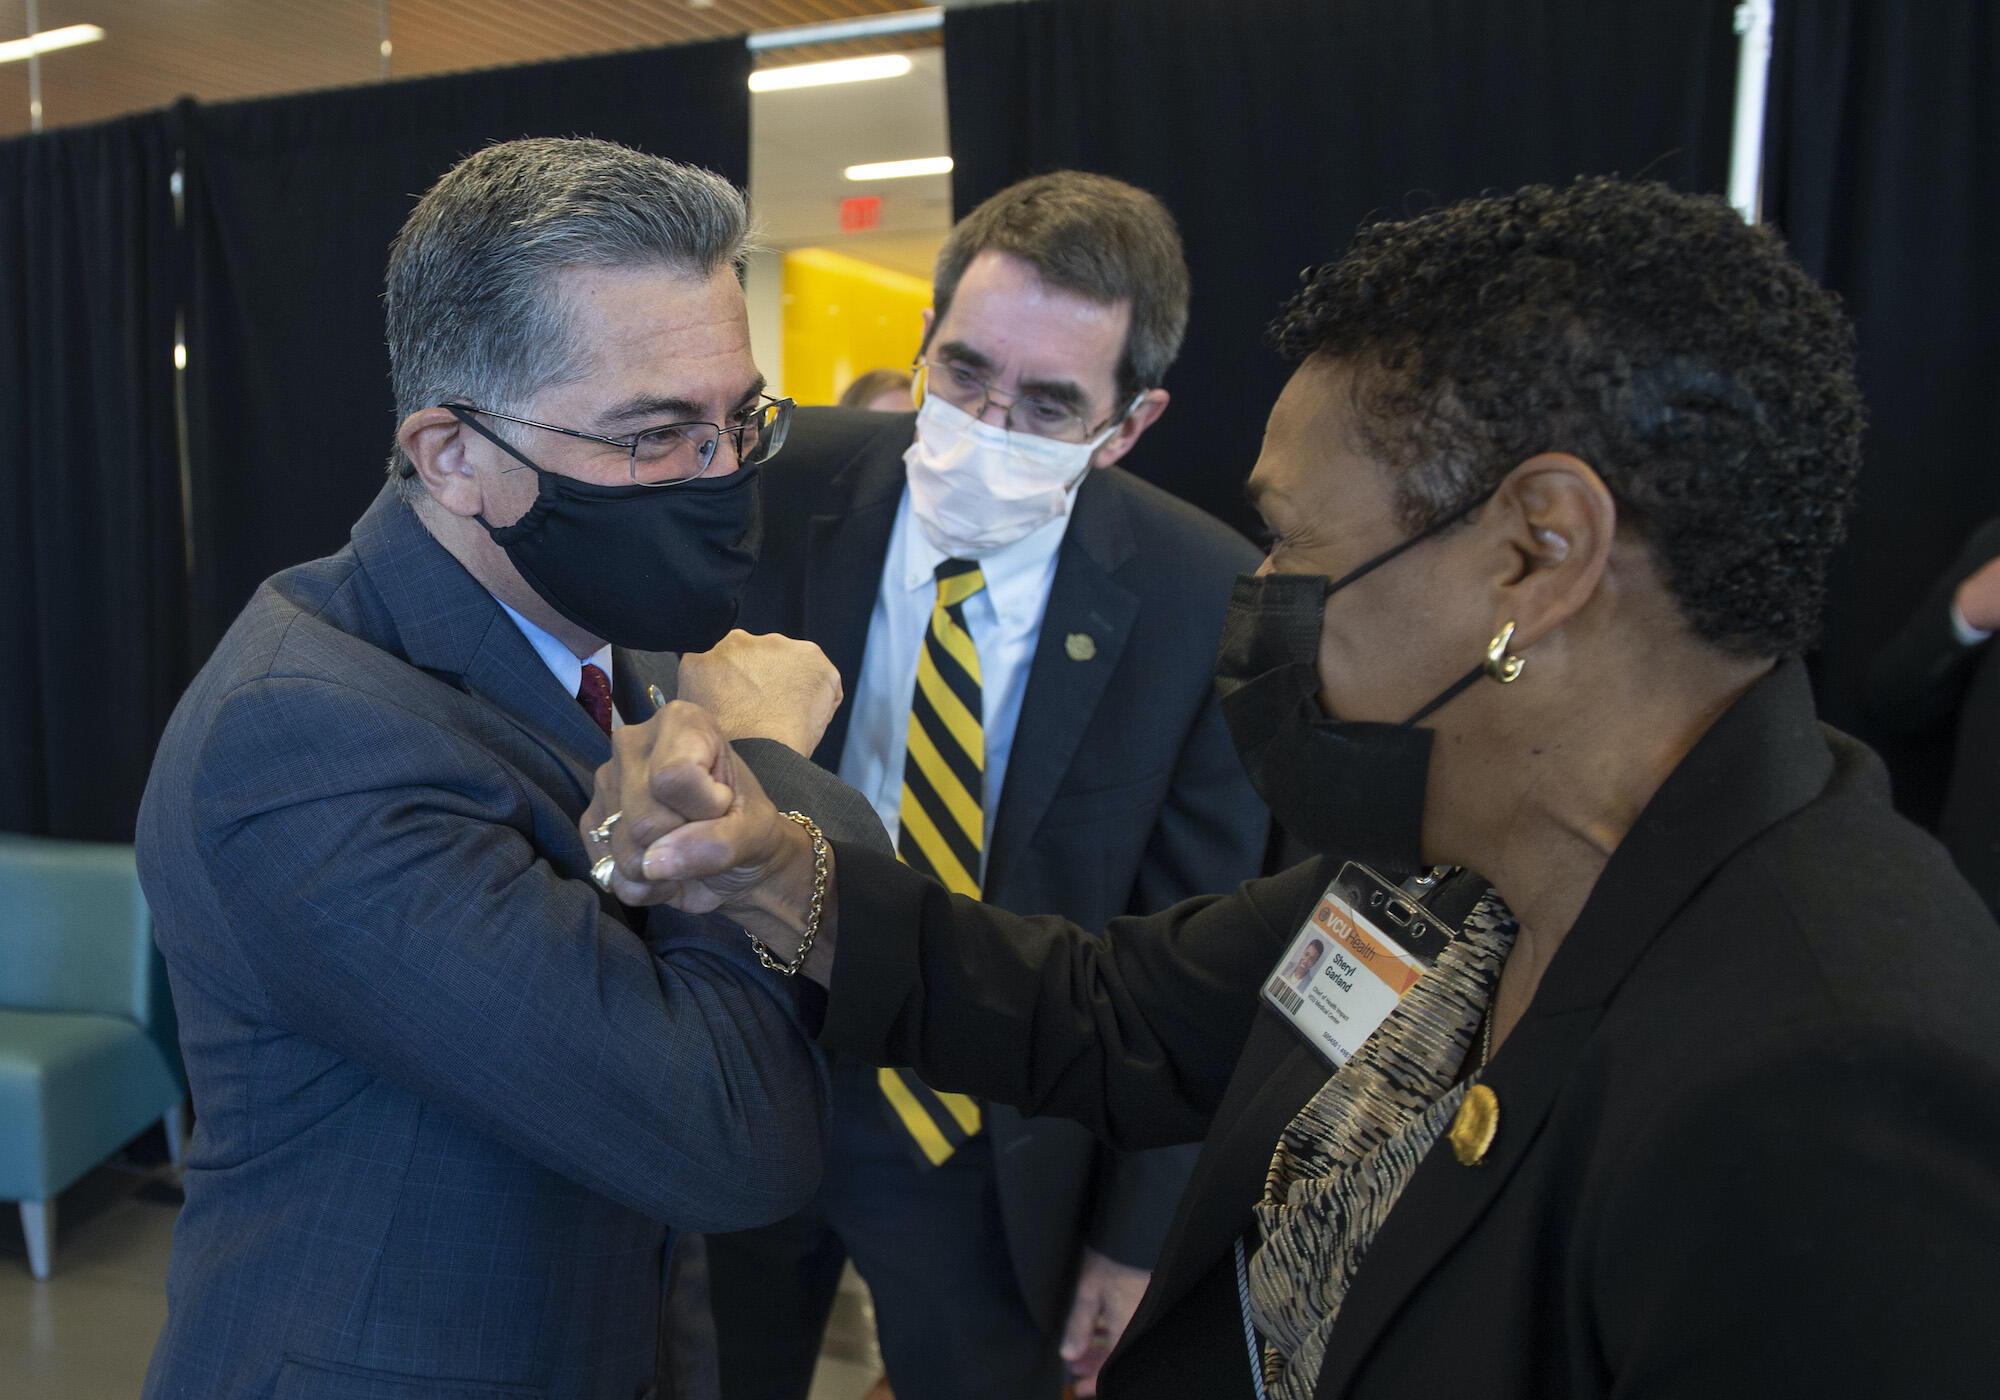 U.S. Secretary of Health and Human Services Xavier Becerra greets Sheryl Garland, chief of health impact for VCU Health System.